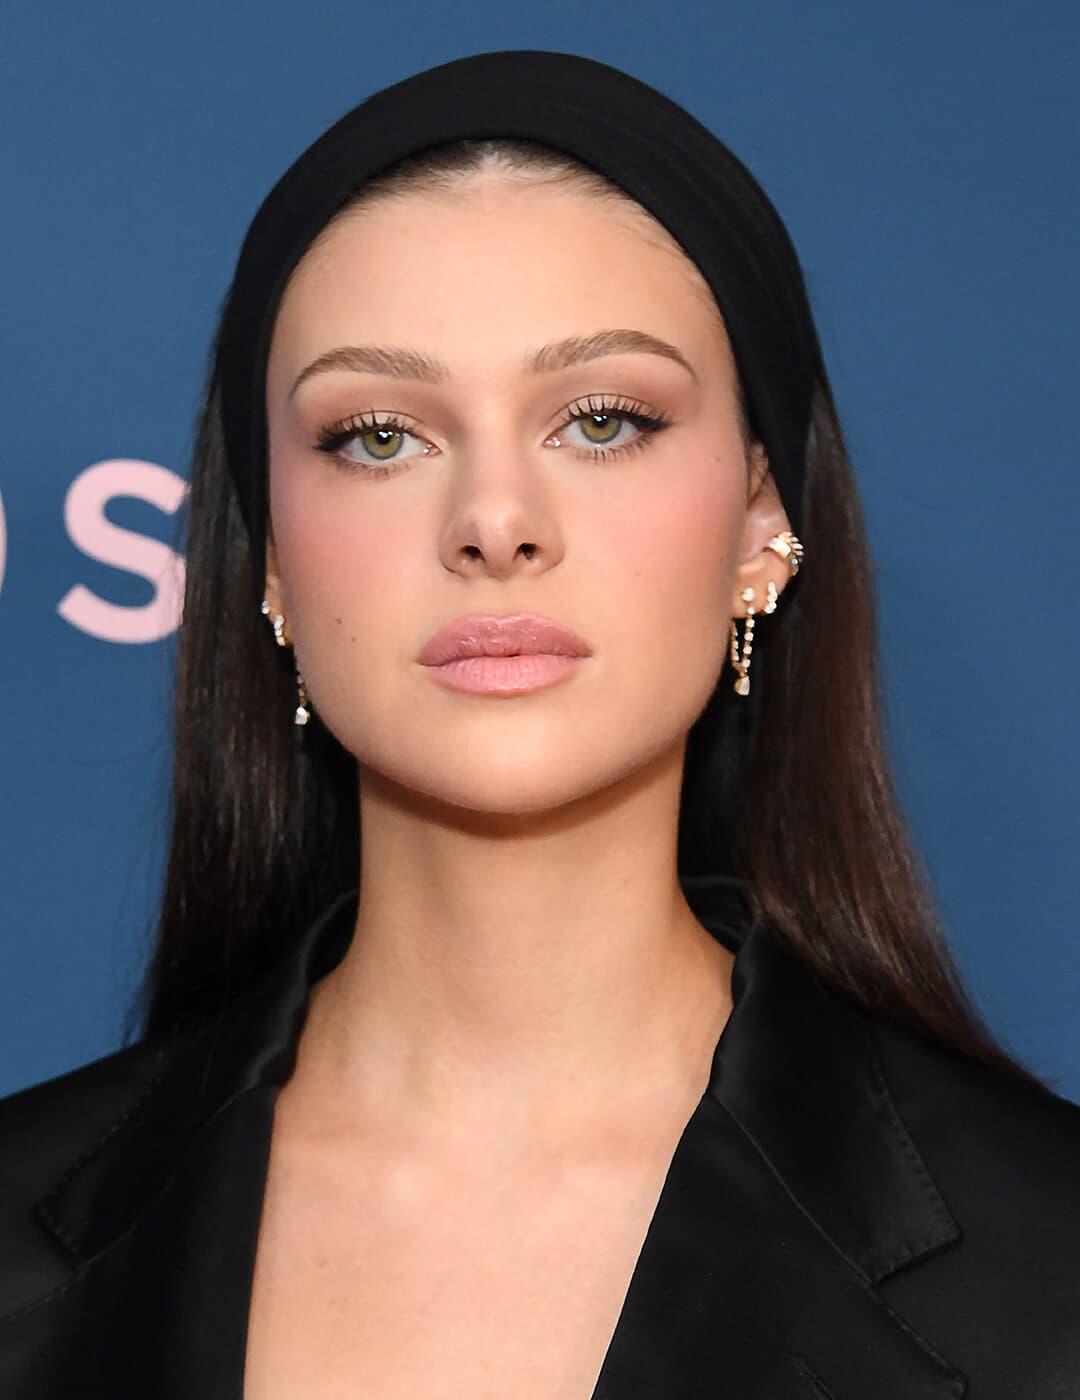 Nicola Peltz attends The Hollywood Reporter's Women In Entertainment Gala Presented By Lifetime on December 07, 2022 in Los Angeles, California.